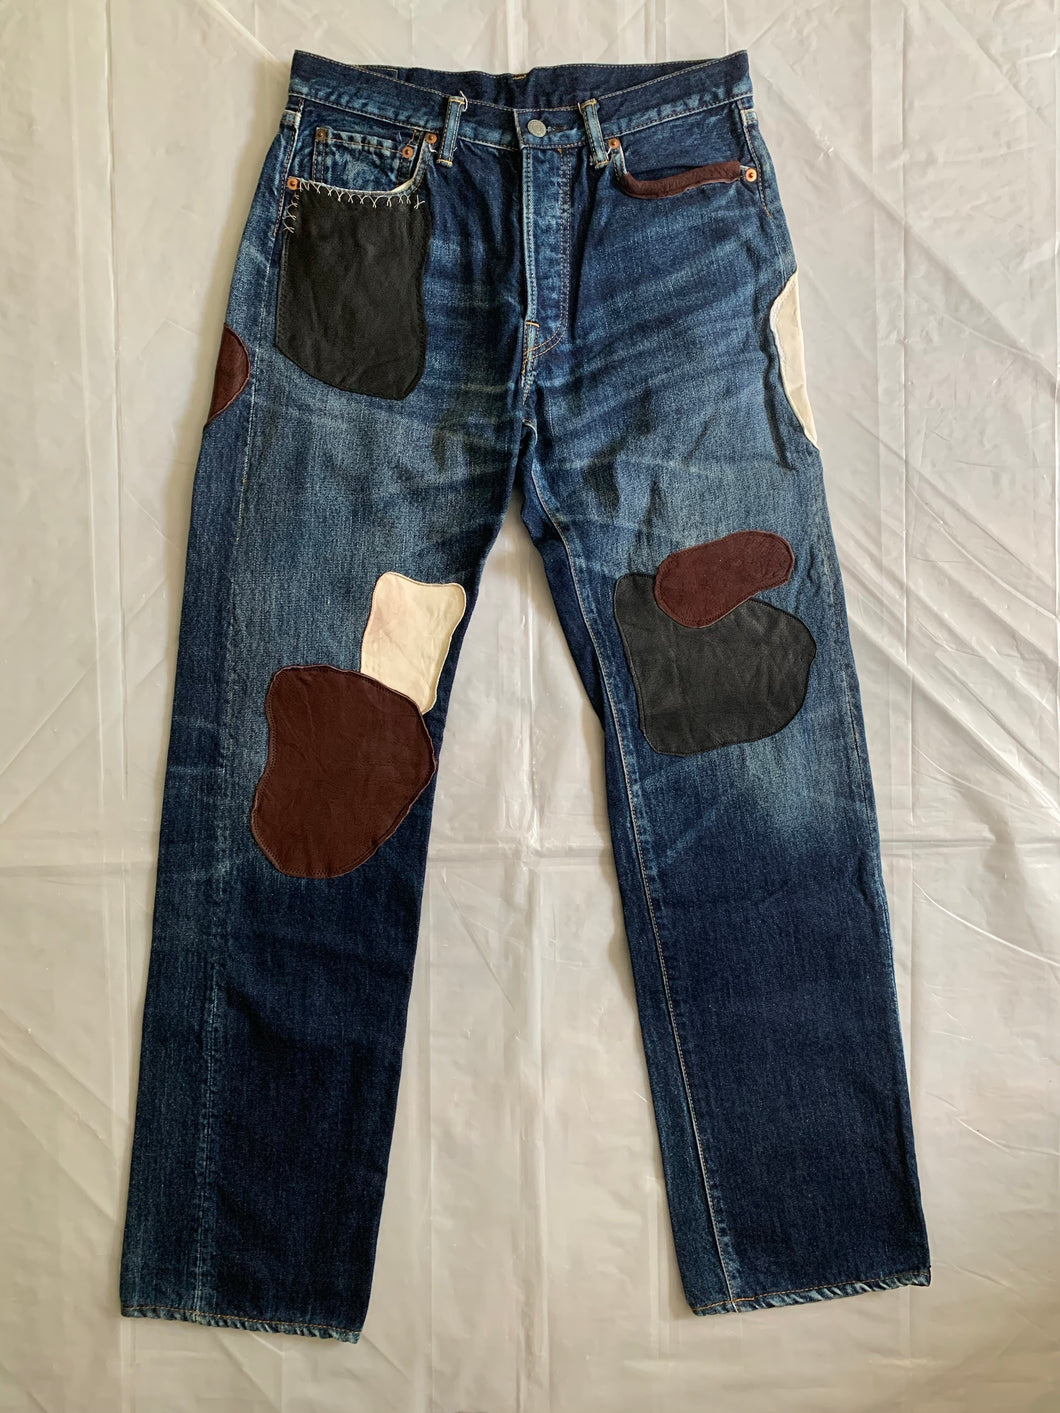 2000s Yohji Yamamoto x Spotted Horse Leather Patchworked Denim - Size M